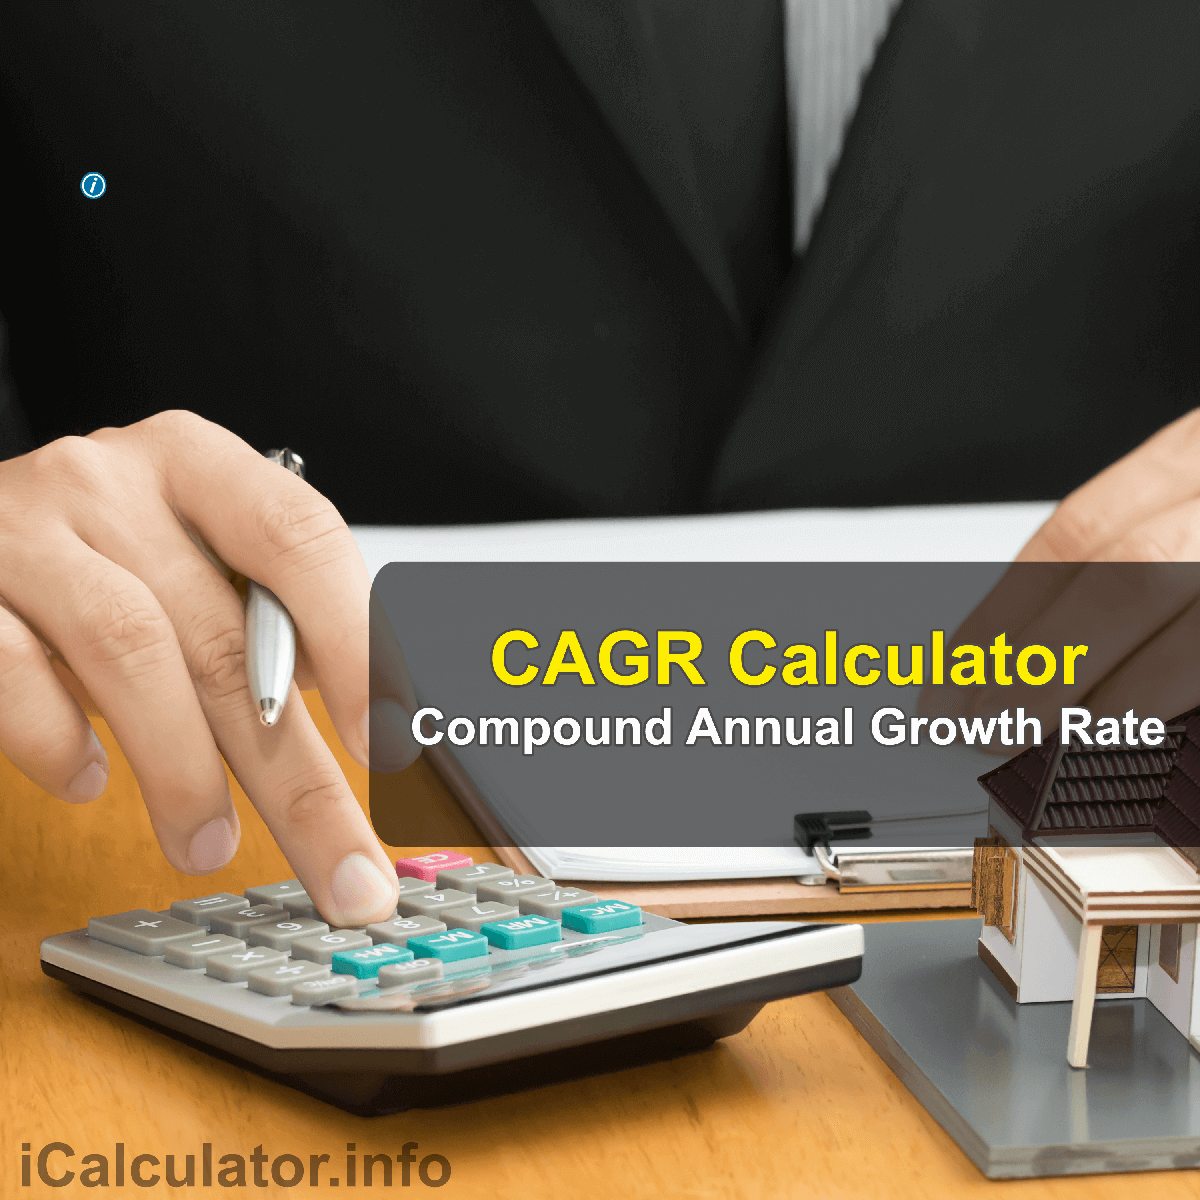 CAGR Calculator. This image provides details of how to calculate the compound annual growth rate using a good calculator, a pencil and paper. By using the Compound Annual Growth Rate formula, the CAGR Calculator provides a true calculation of the annual growth rate on an investment whose value has fluctuated during the period of investment.